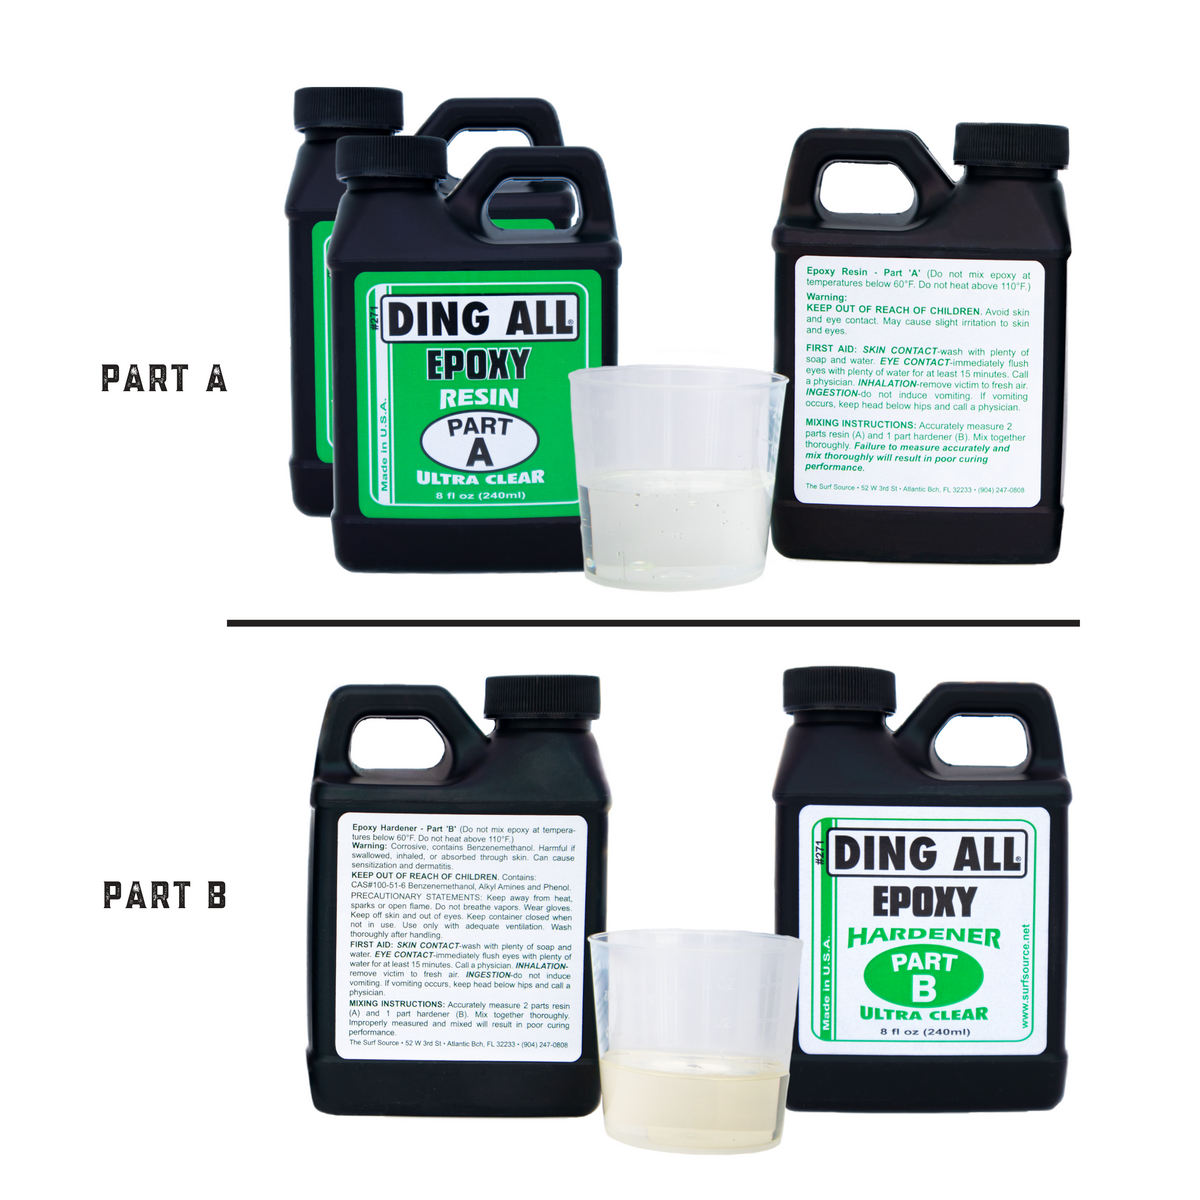 Ding All Ultra Clear Epoxy 3 oz. Set – Ding All & SunCure